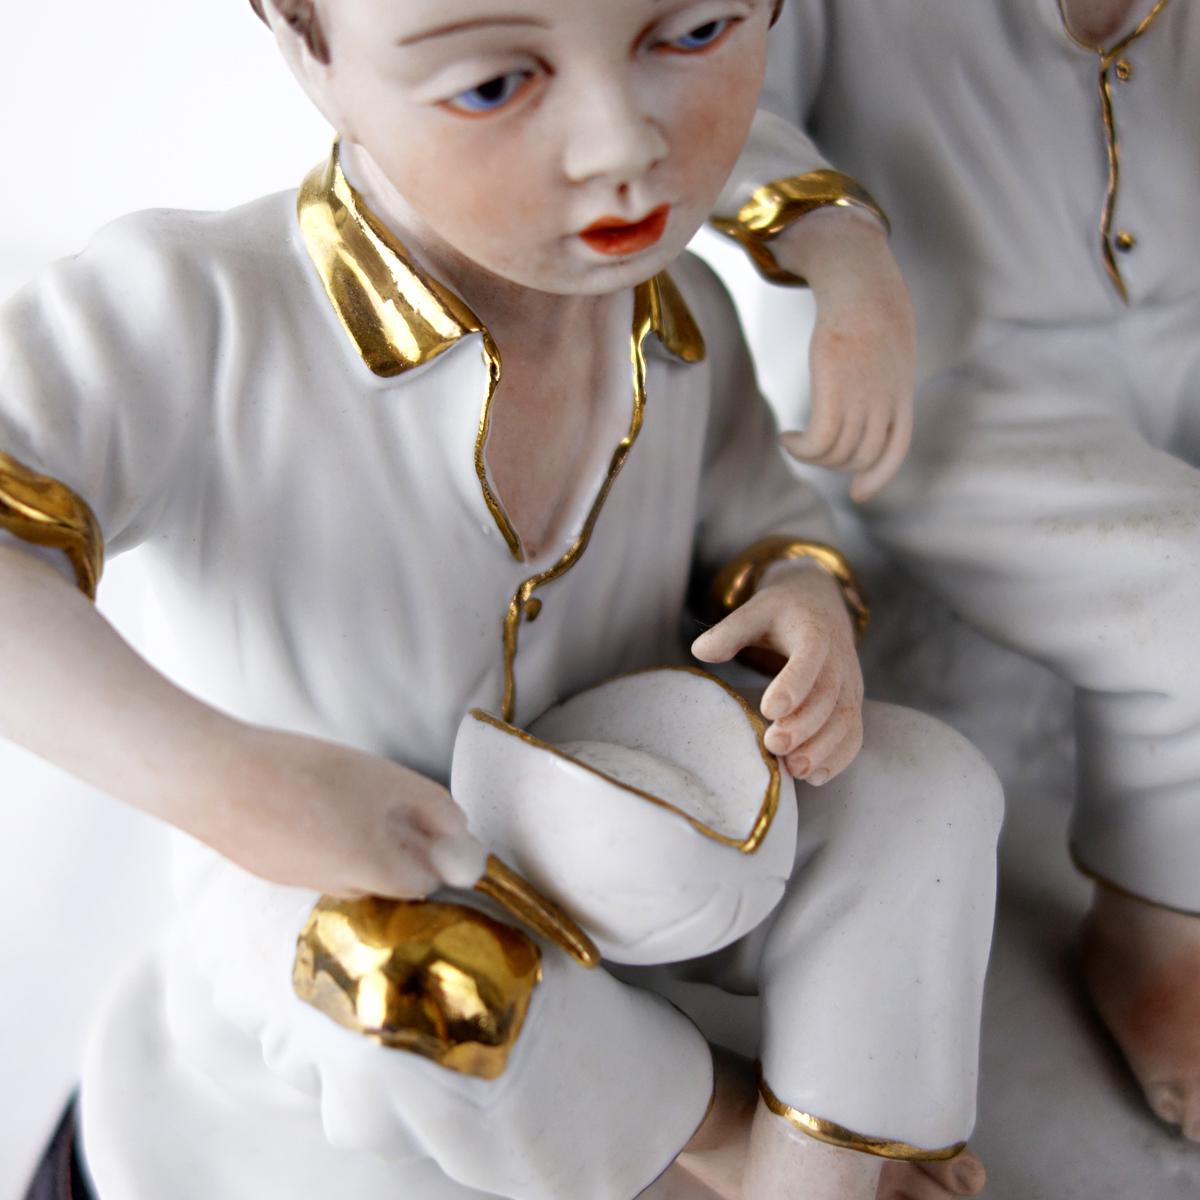 Biscuit Porcelain Statuette of Two Boys Eating a Melon with Gold-Colored Details For Sale 5